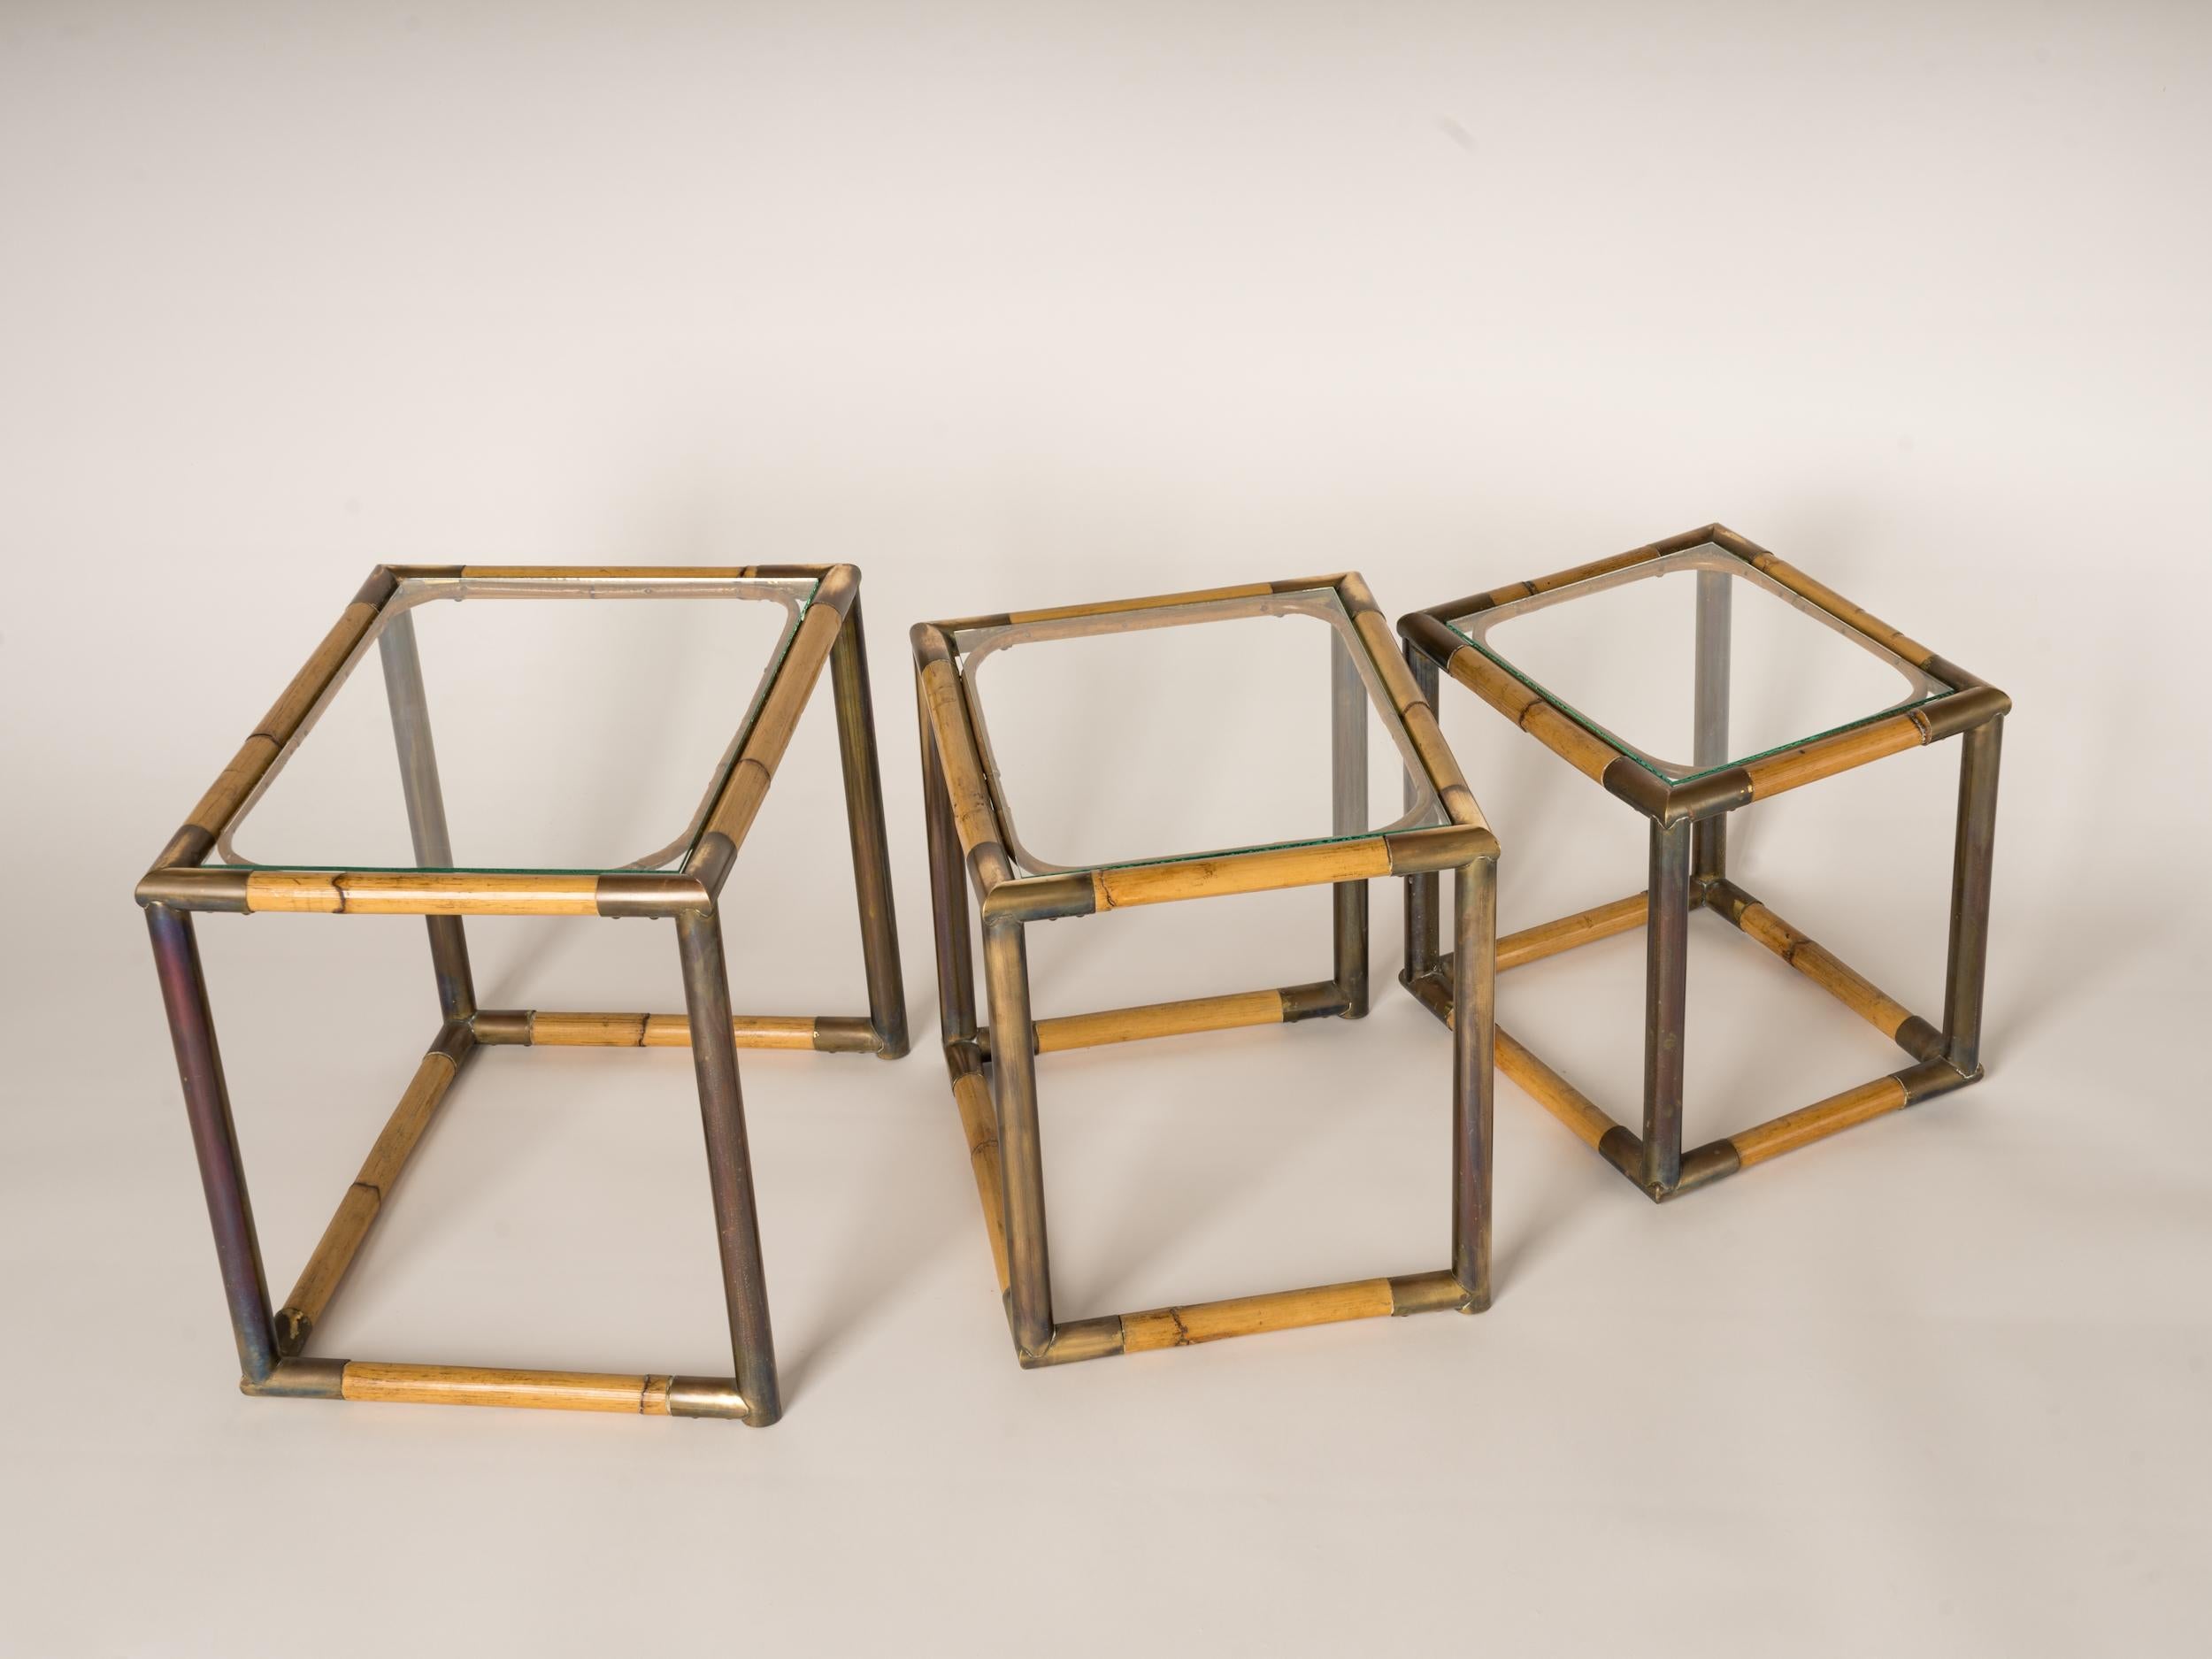 Set of Three Bamboo & Brass Nesting Tables, Italy, 1970's For Sale 1